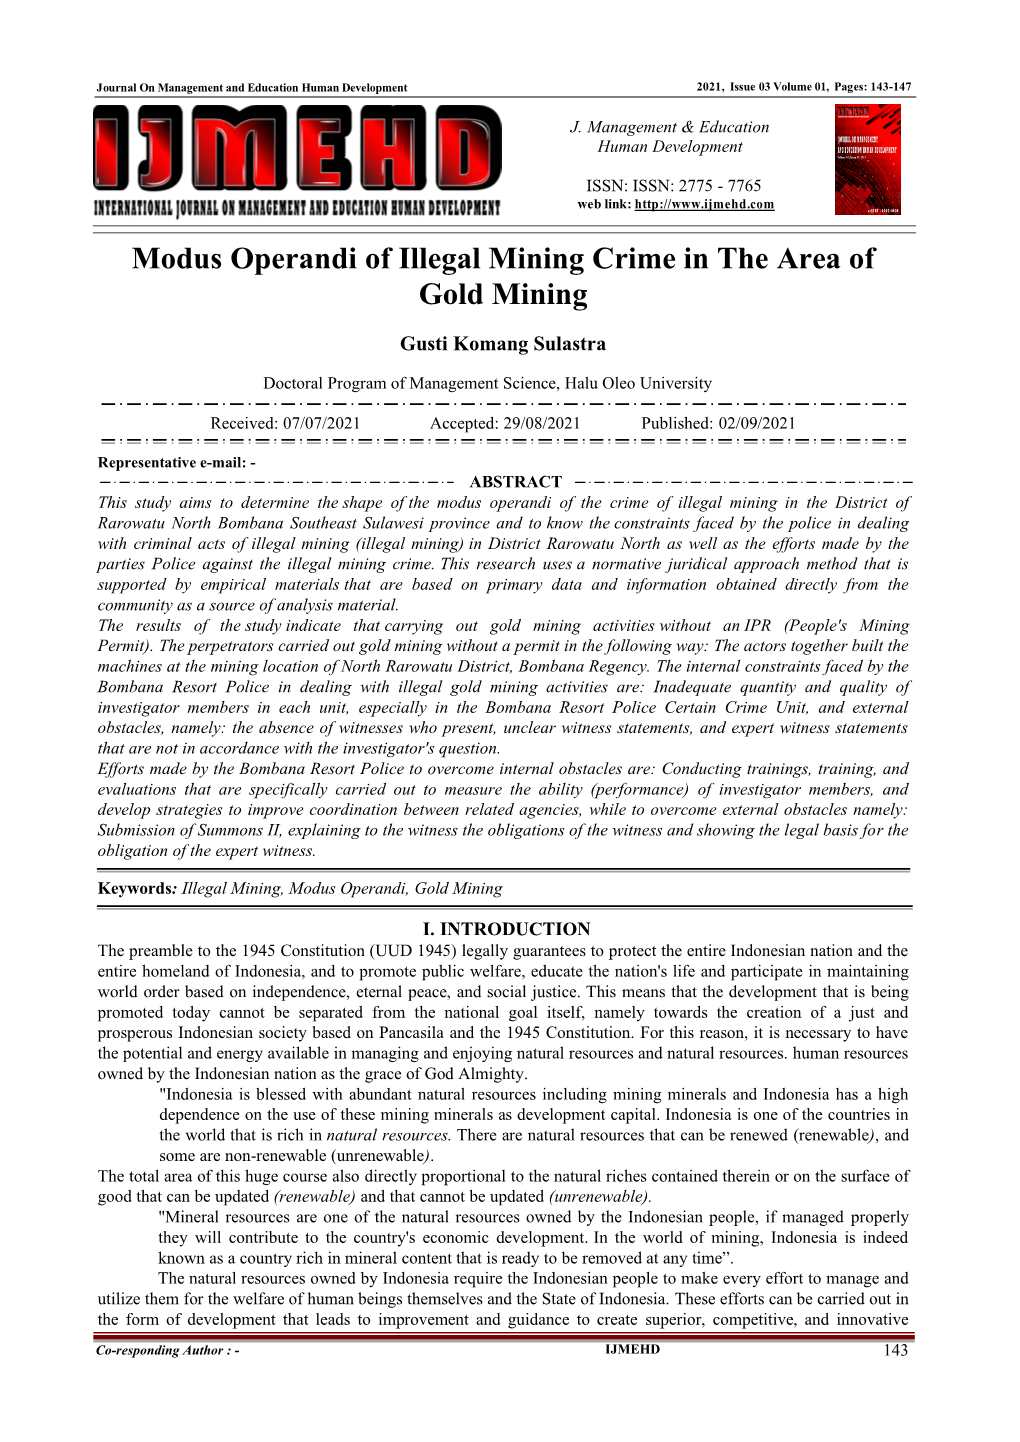 Modus Operandi of Illegal Mining Crime in the Area of Gold Mining